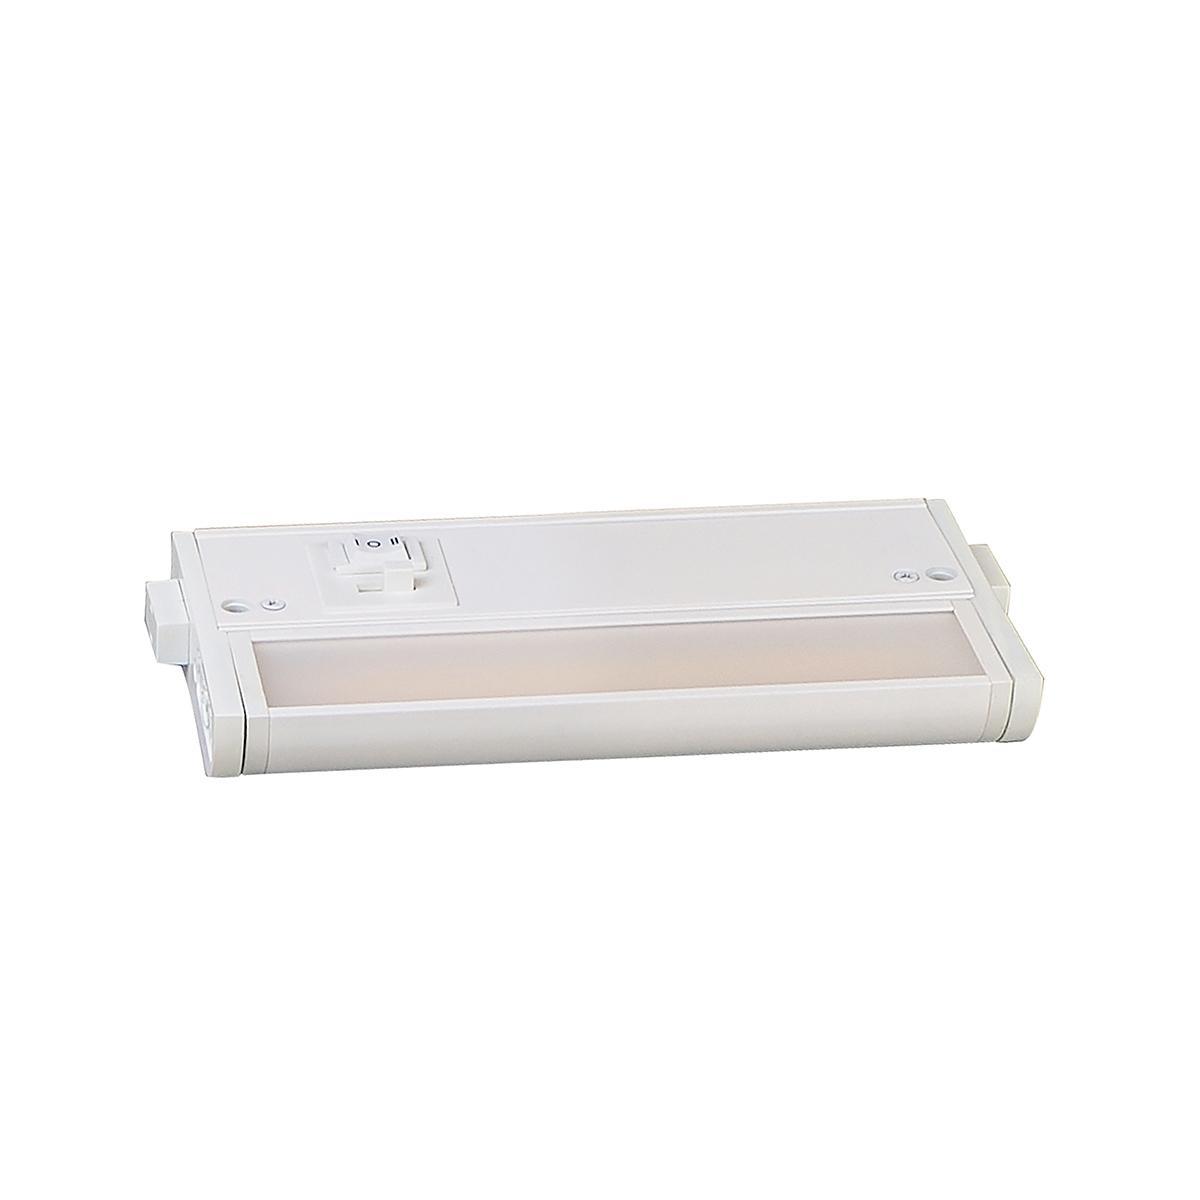 CounterMax 5K 30 Inch Under Cabinet LED Light with Patent gimbals, 1800 Lumens, Linkable, CCT Selectable 2700K to 5000K, 120V, White - Bees Lighting